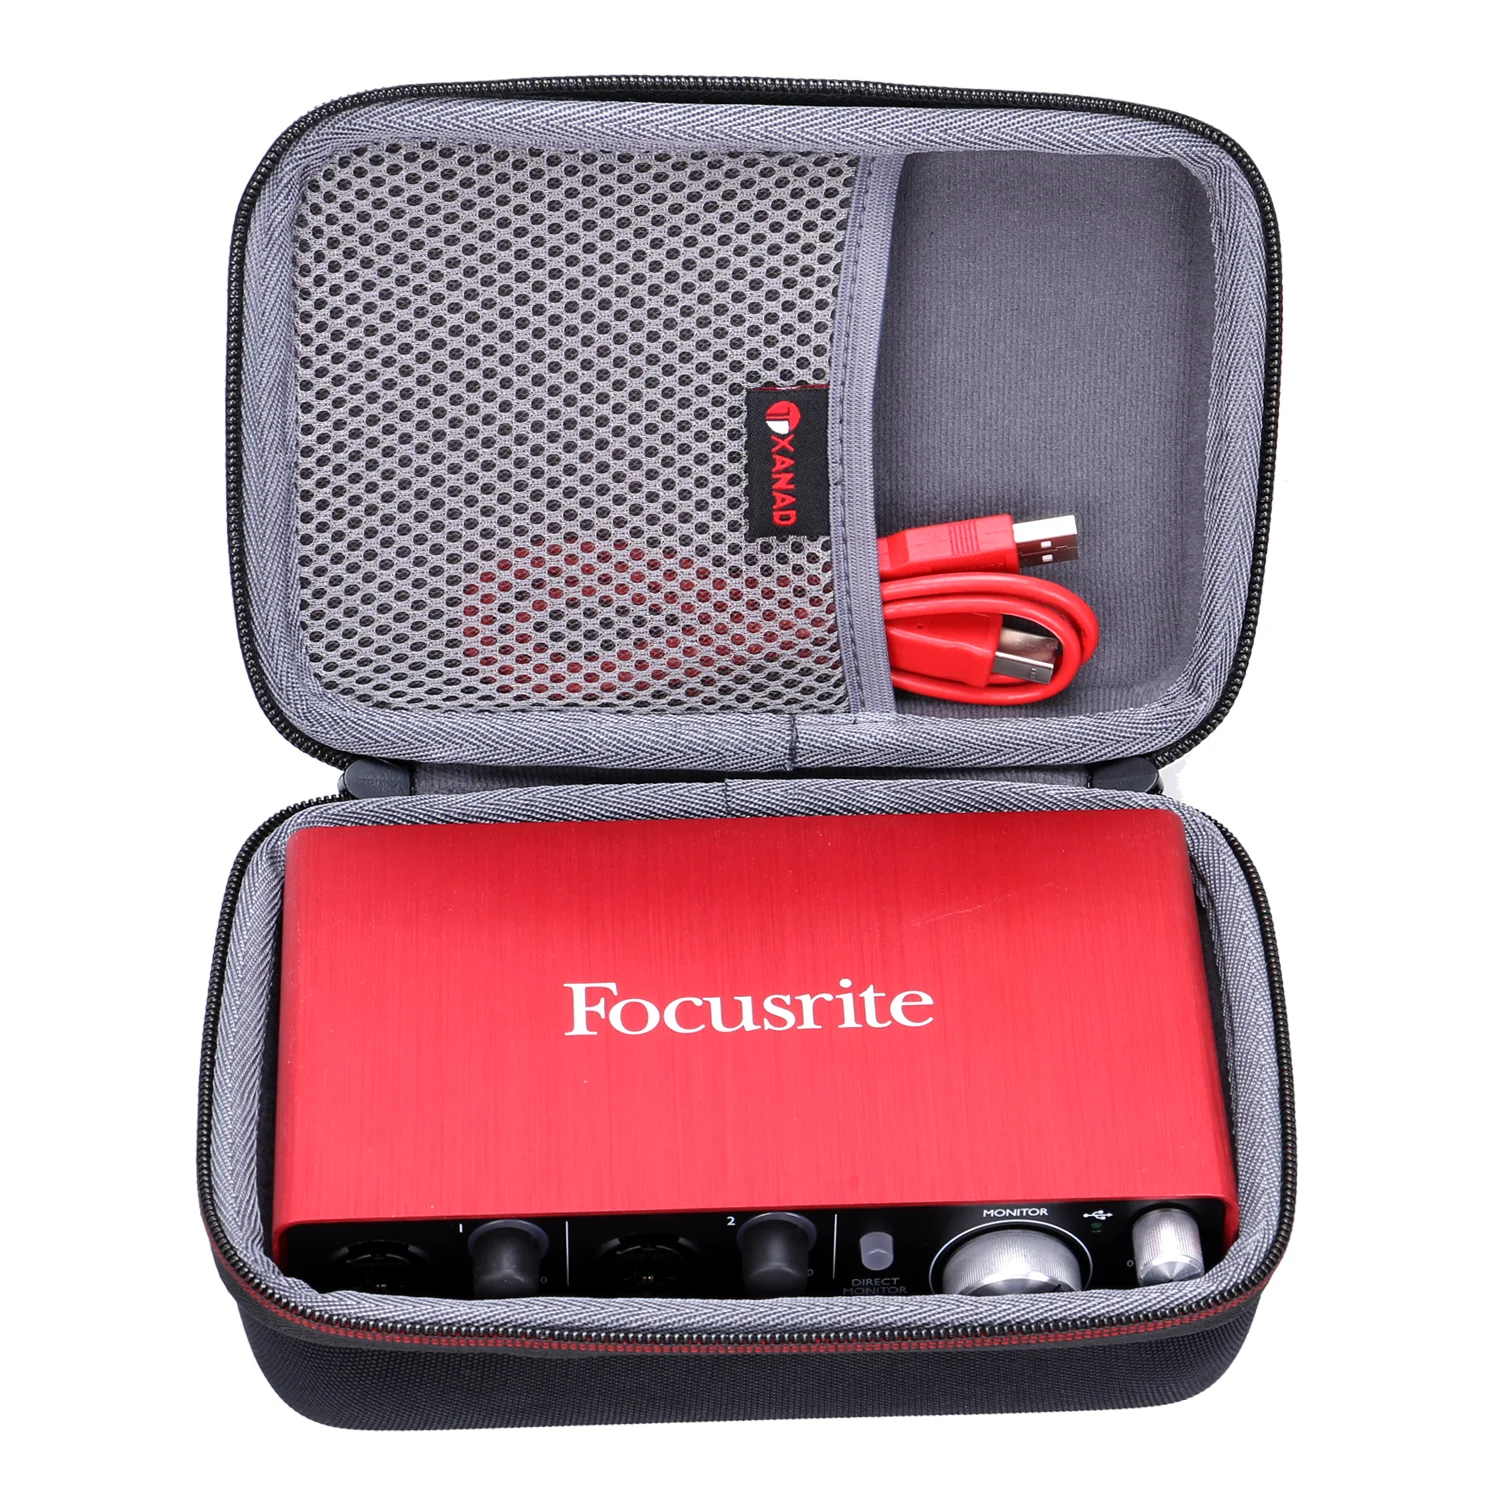 Waterproof EVA Hard Case For Focusrite Scarlett Solo (2nd Gen) USB Audio Interface With Pro Tools | First